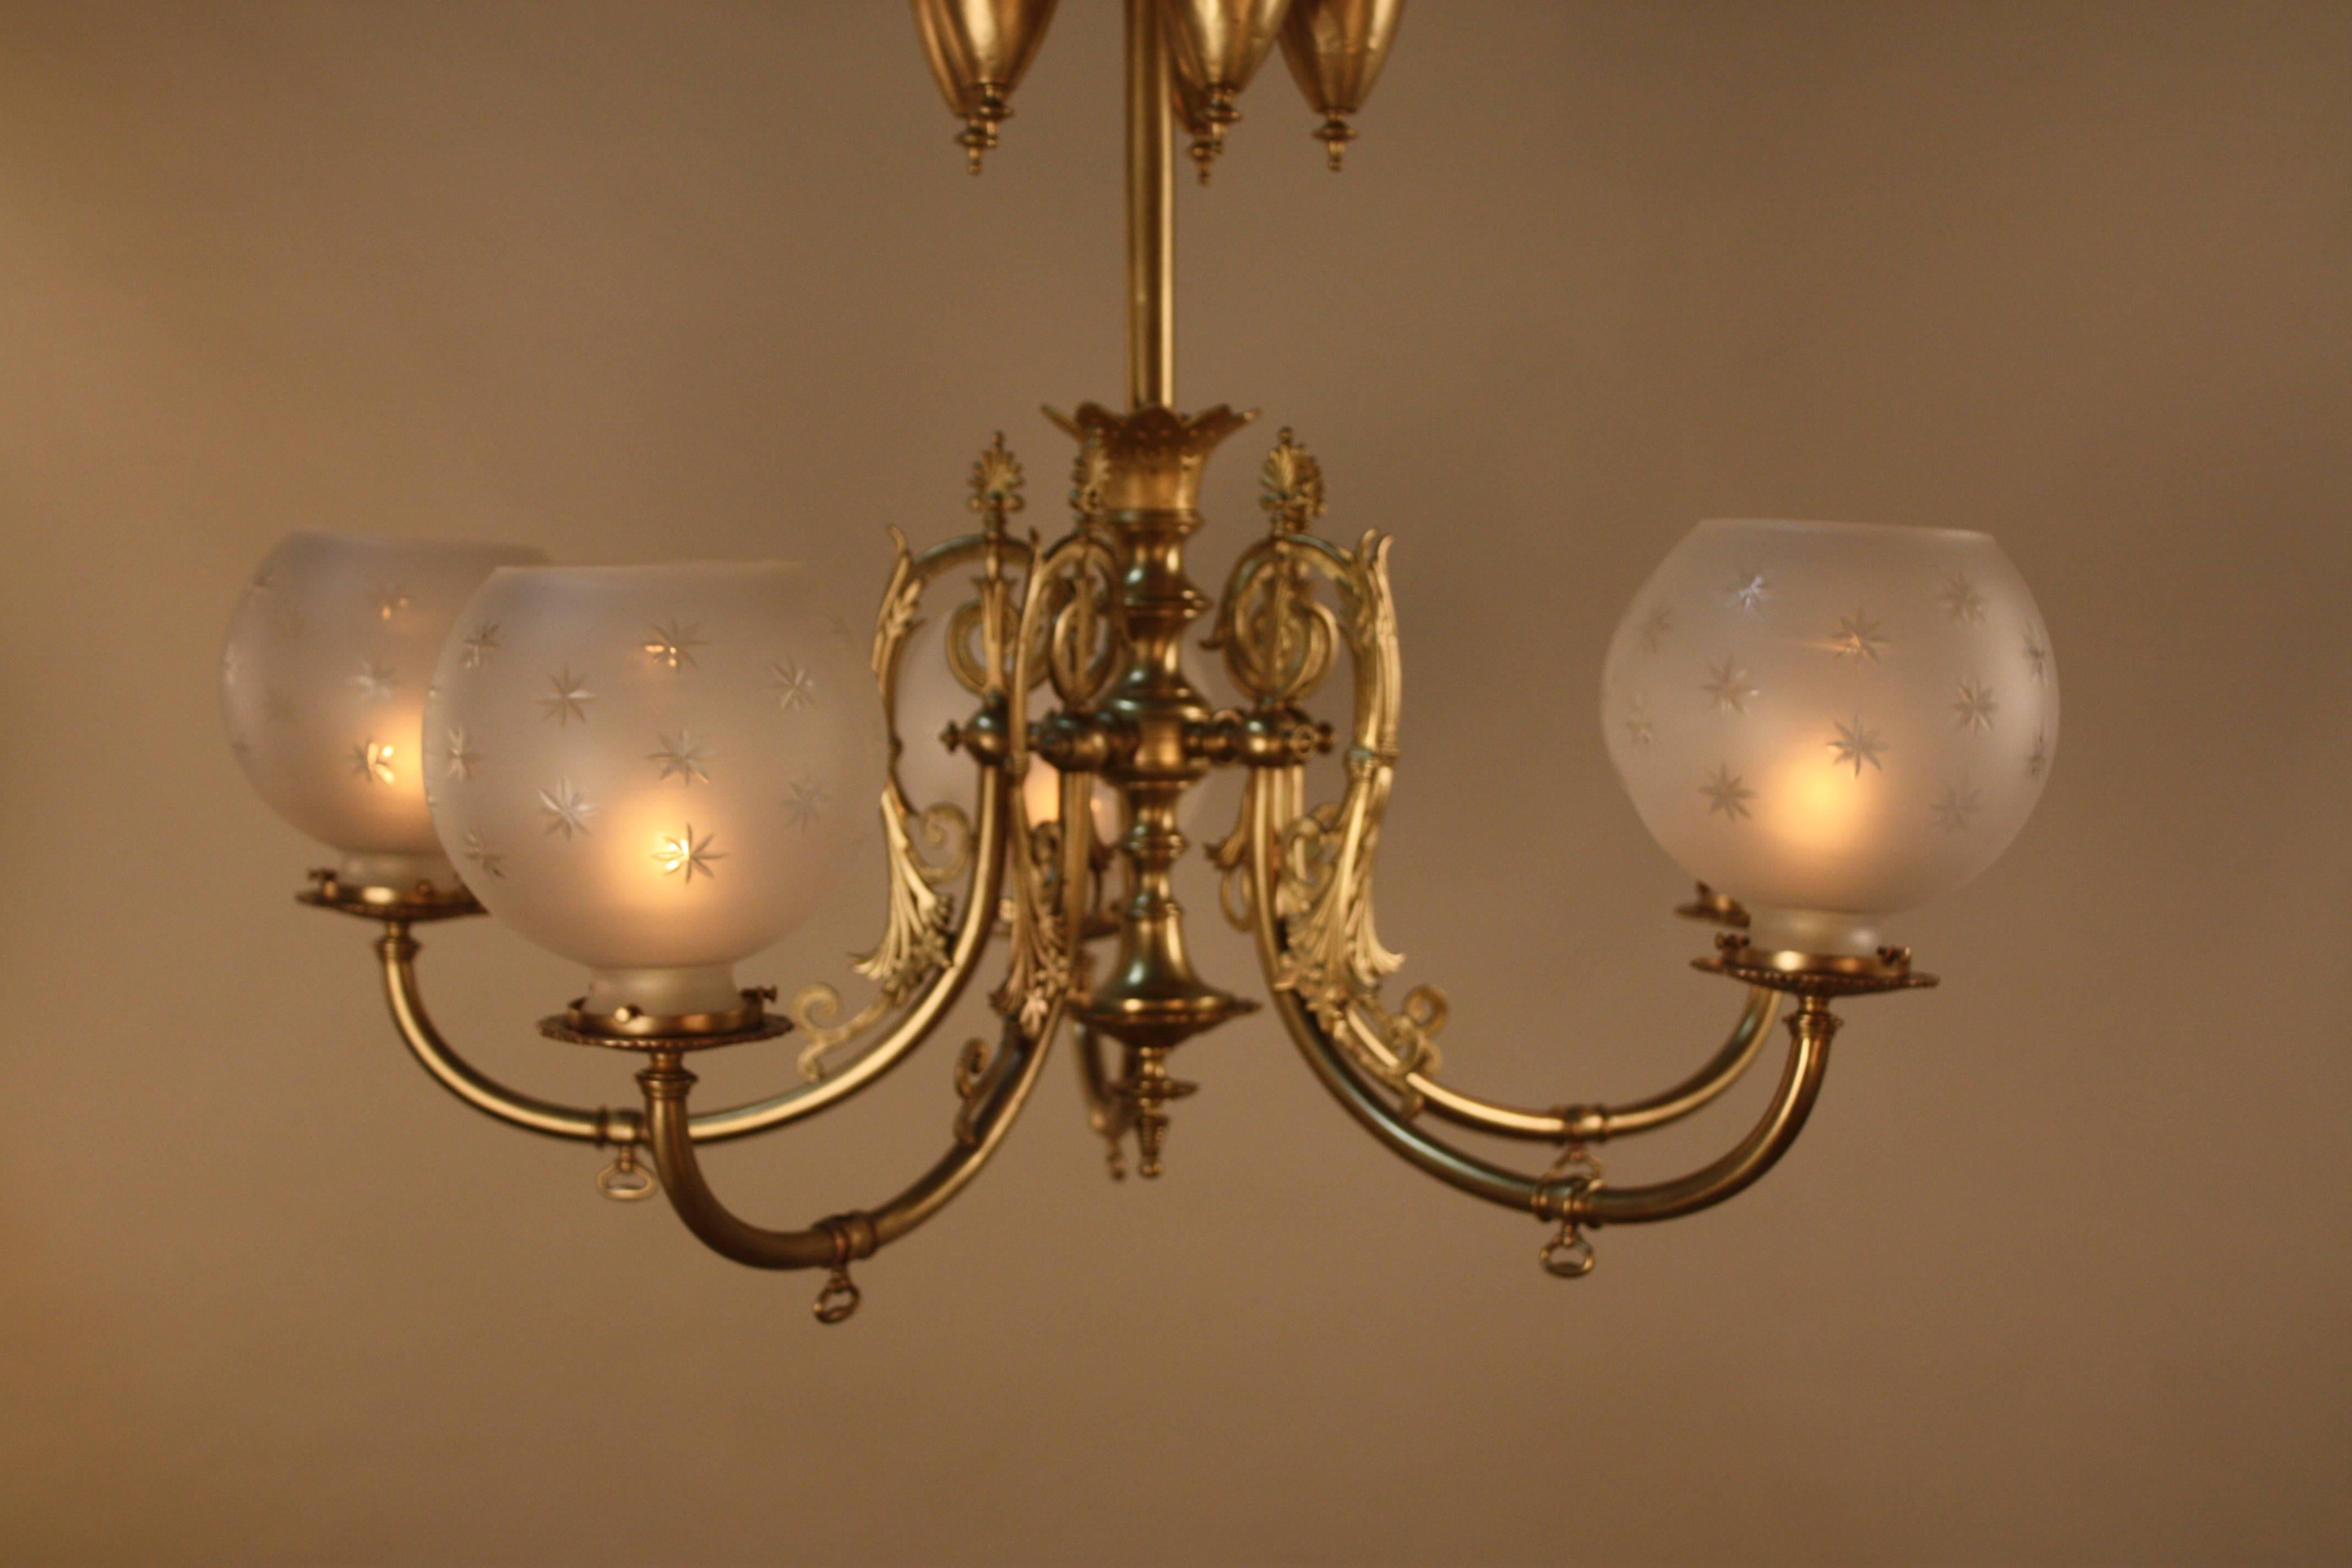 Late 19th century American brass gas chandelier five-star cut-glass shades.
Electrified 60 watts max each light.